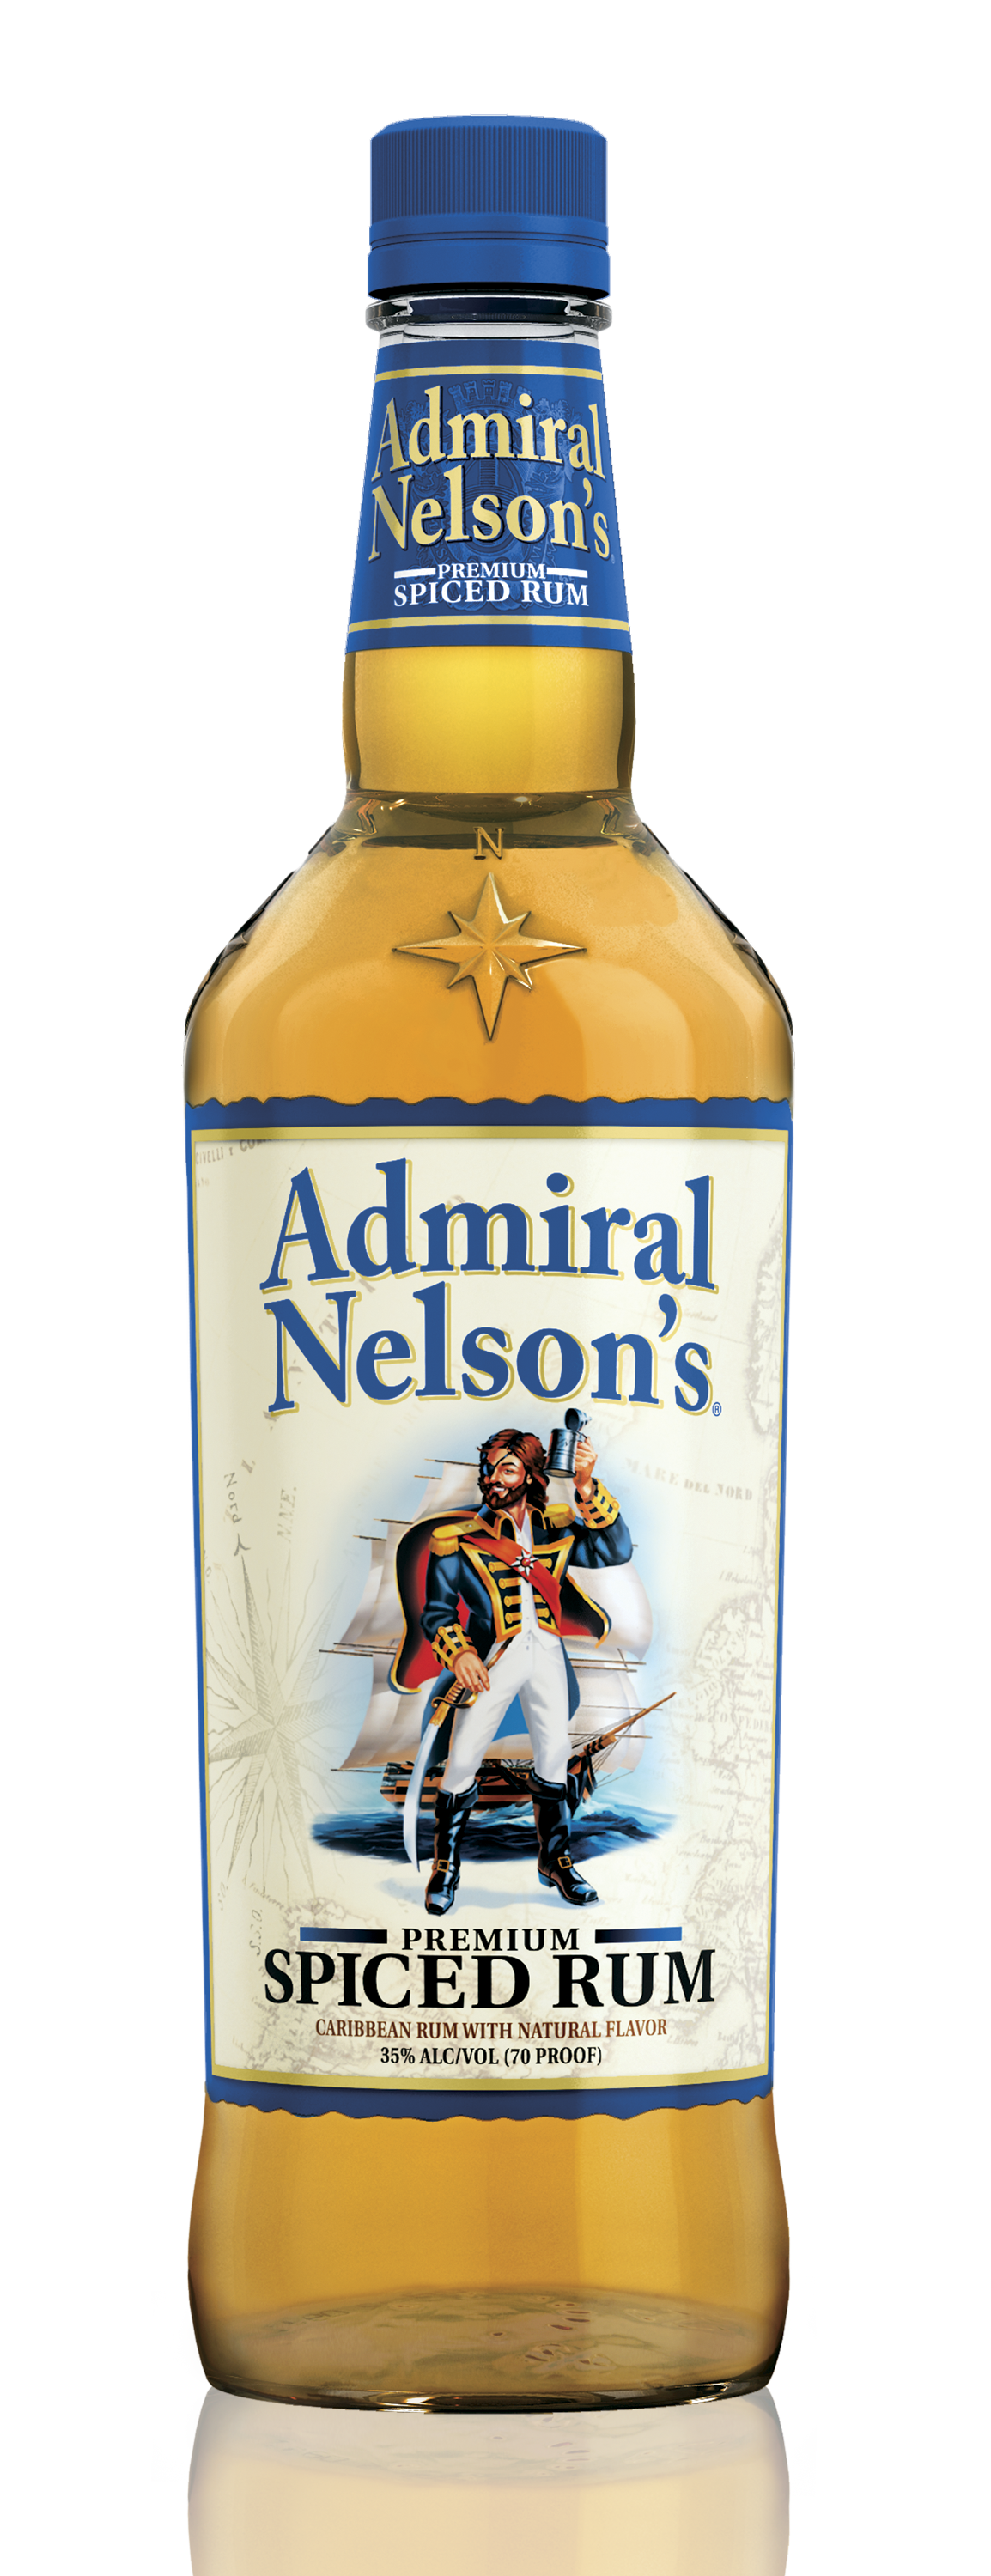 Admiral Nelson's Spiced Rum Gold - 1.75l Bottle